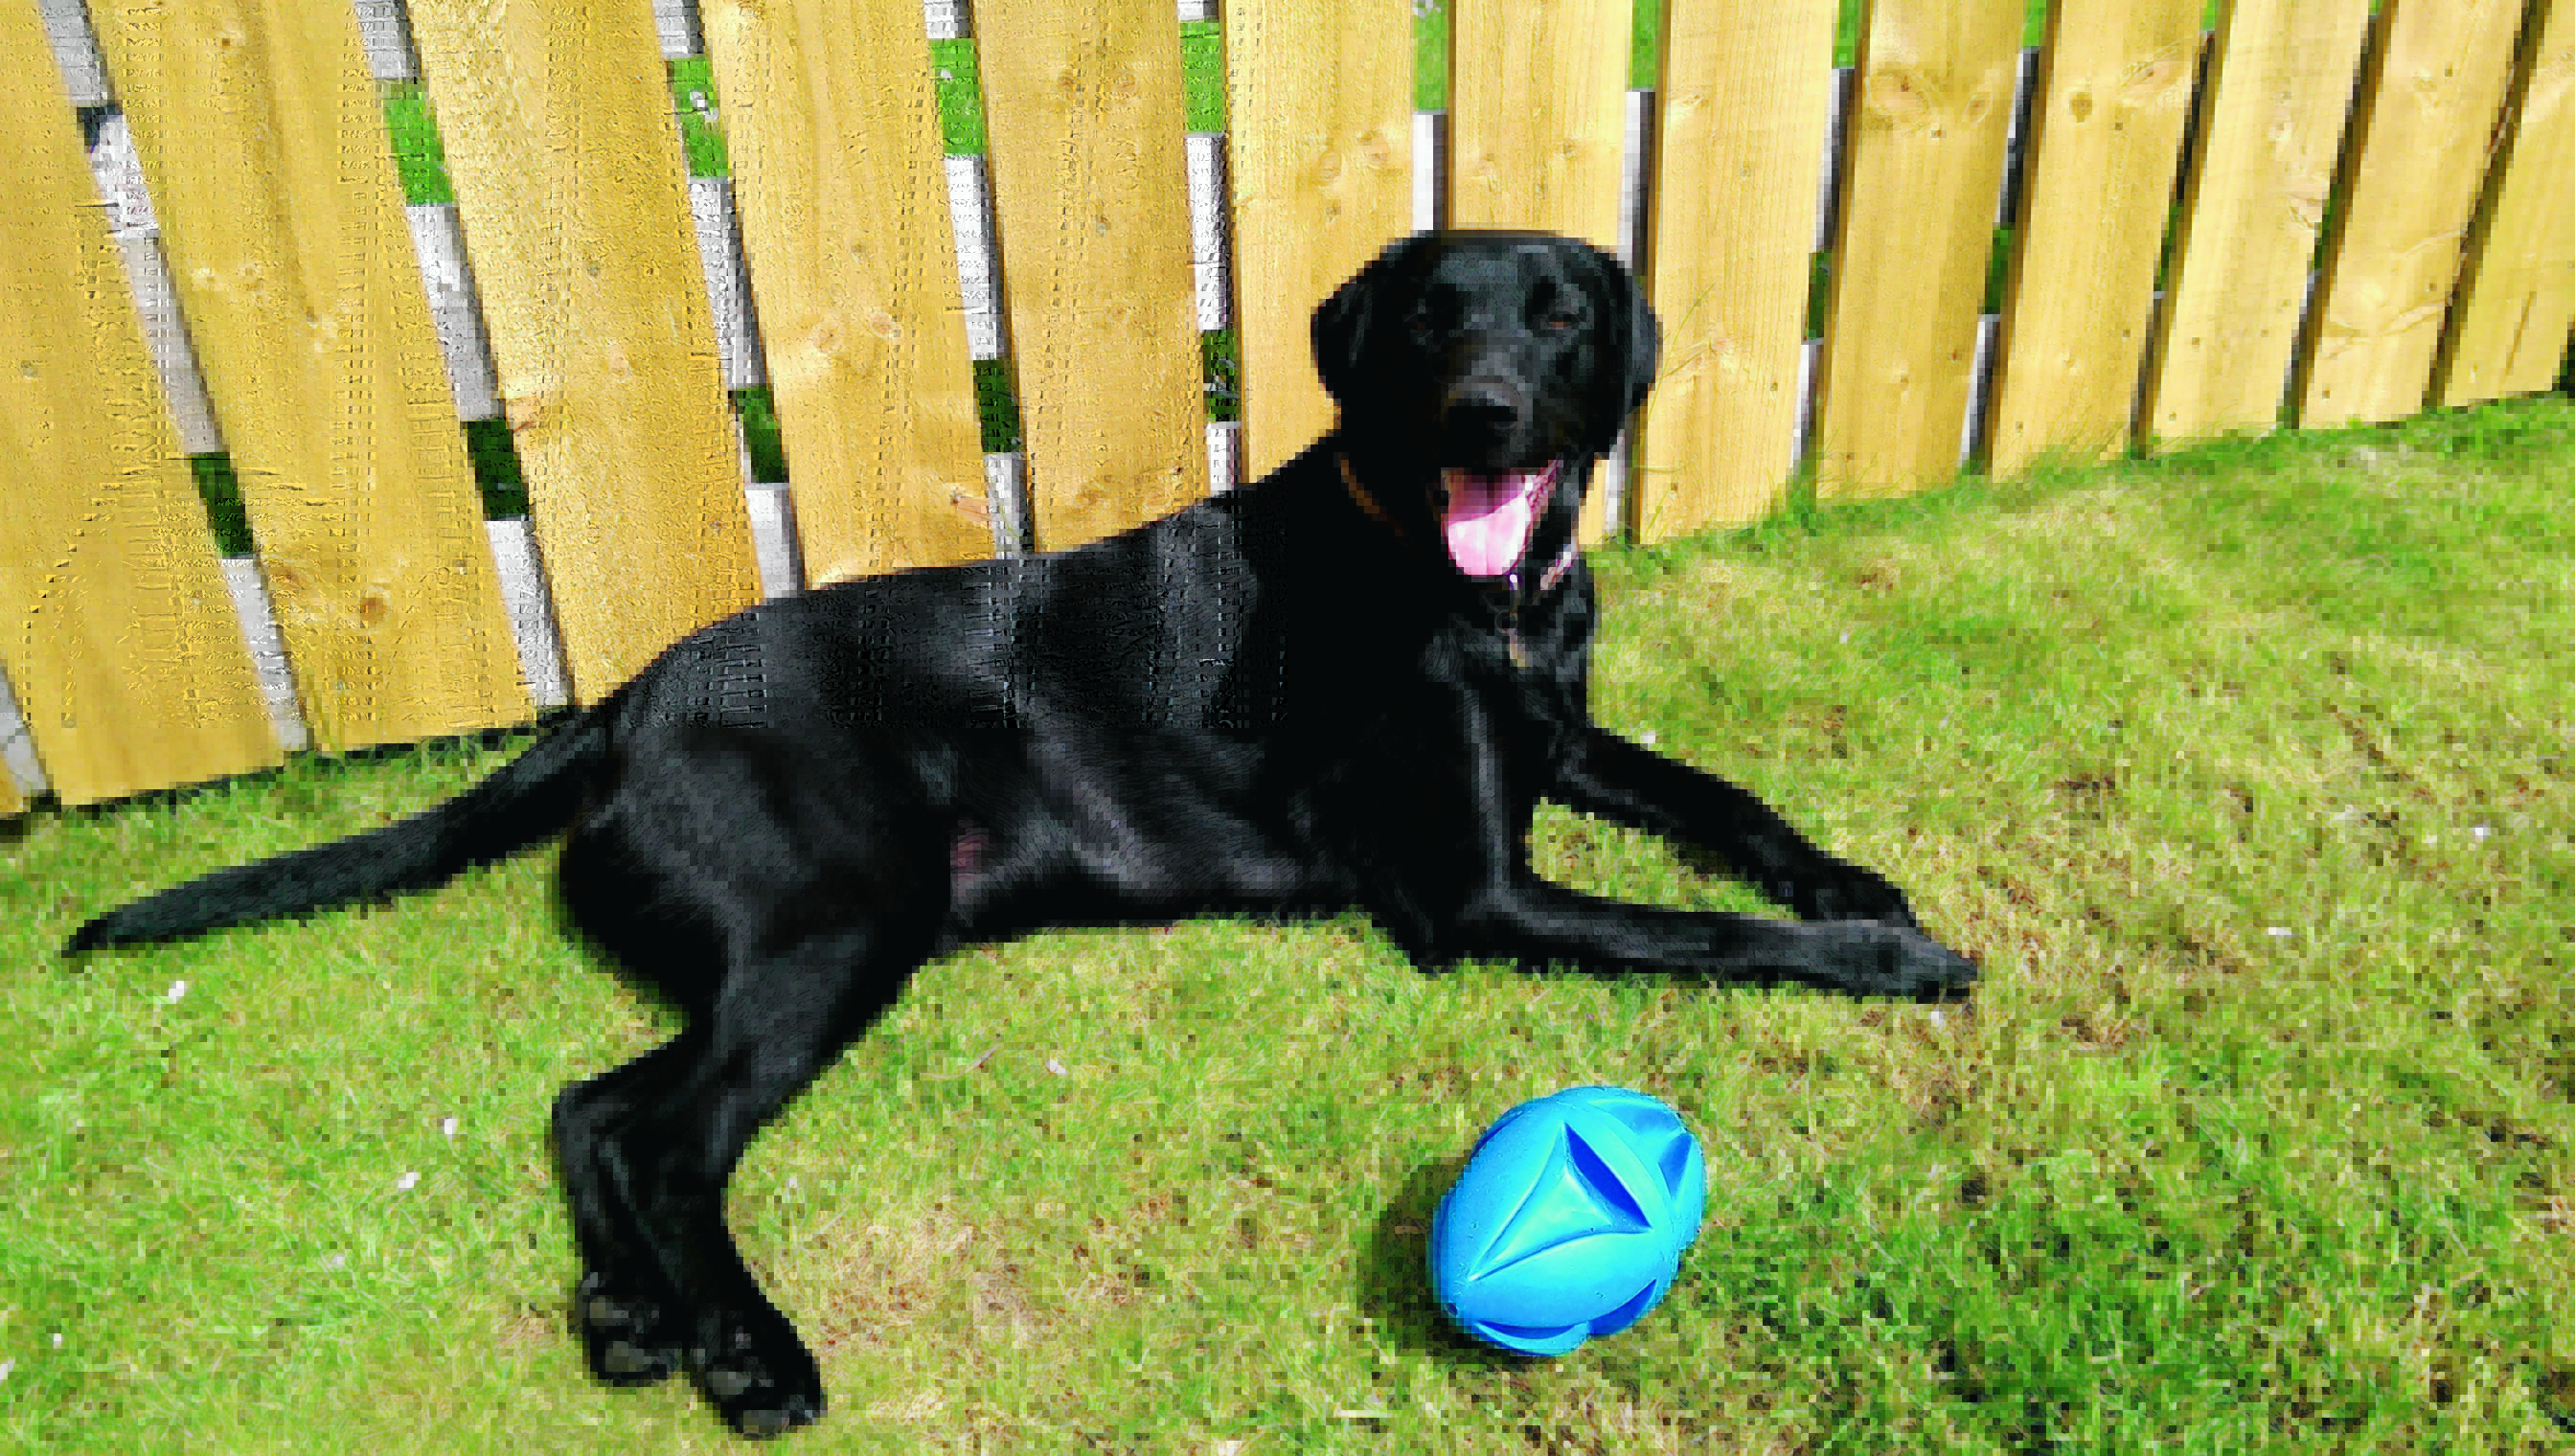 Otis the black Lab, taking a break from playing in the garden on a sunny afternoon. He lives with Diane, Michael, and baby Ethan McCosh in Kemnay, Aberdeenshire.